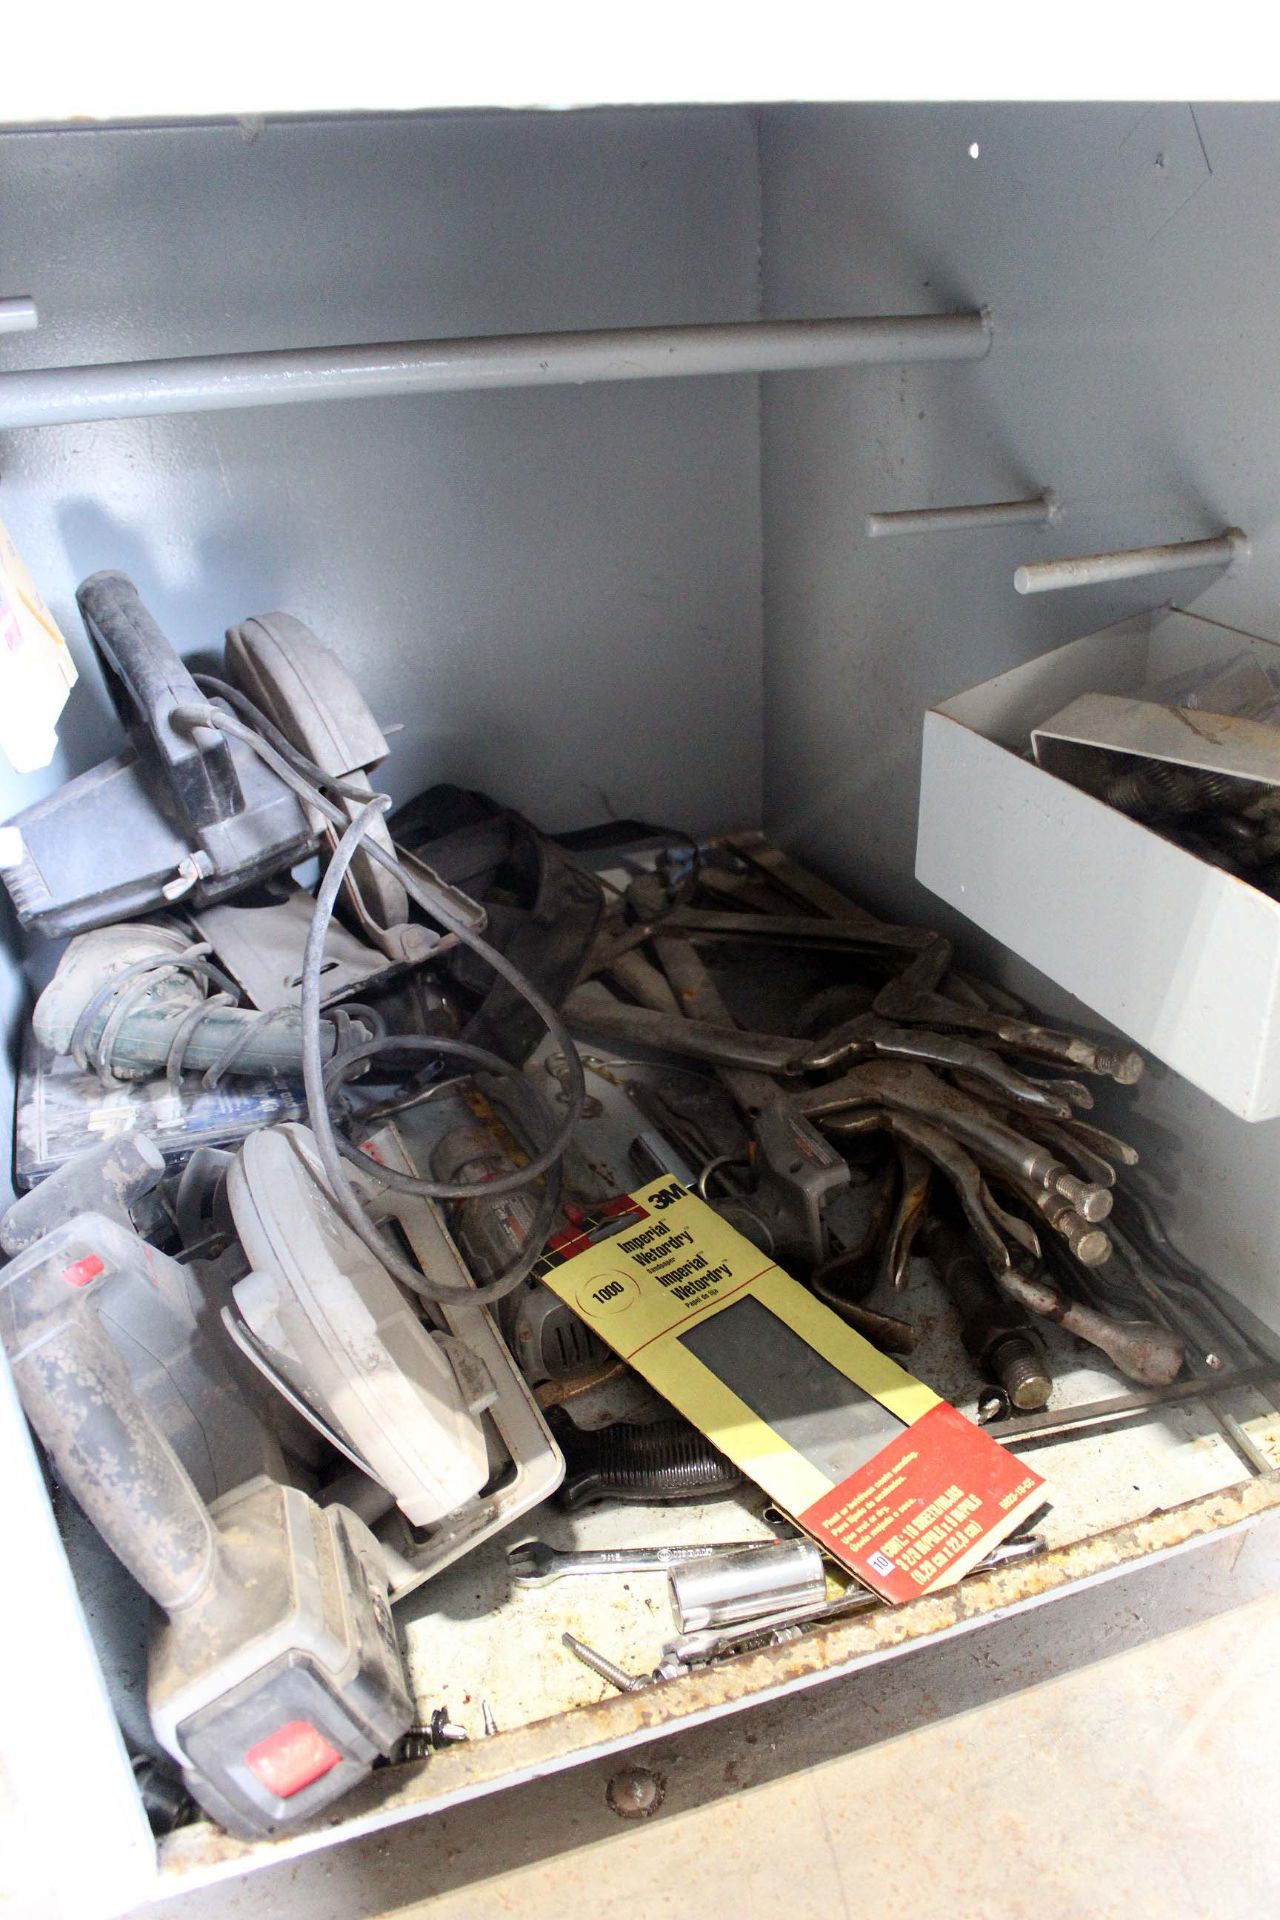 LOT OF HAND TOOLS, in cabinet (cabinet included) (Located at: Former Premises of Worldfab, 2626